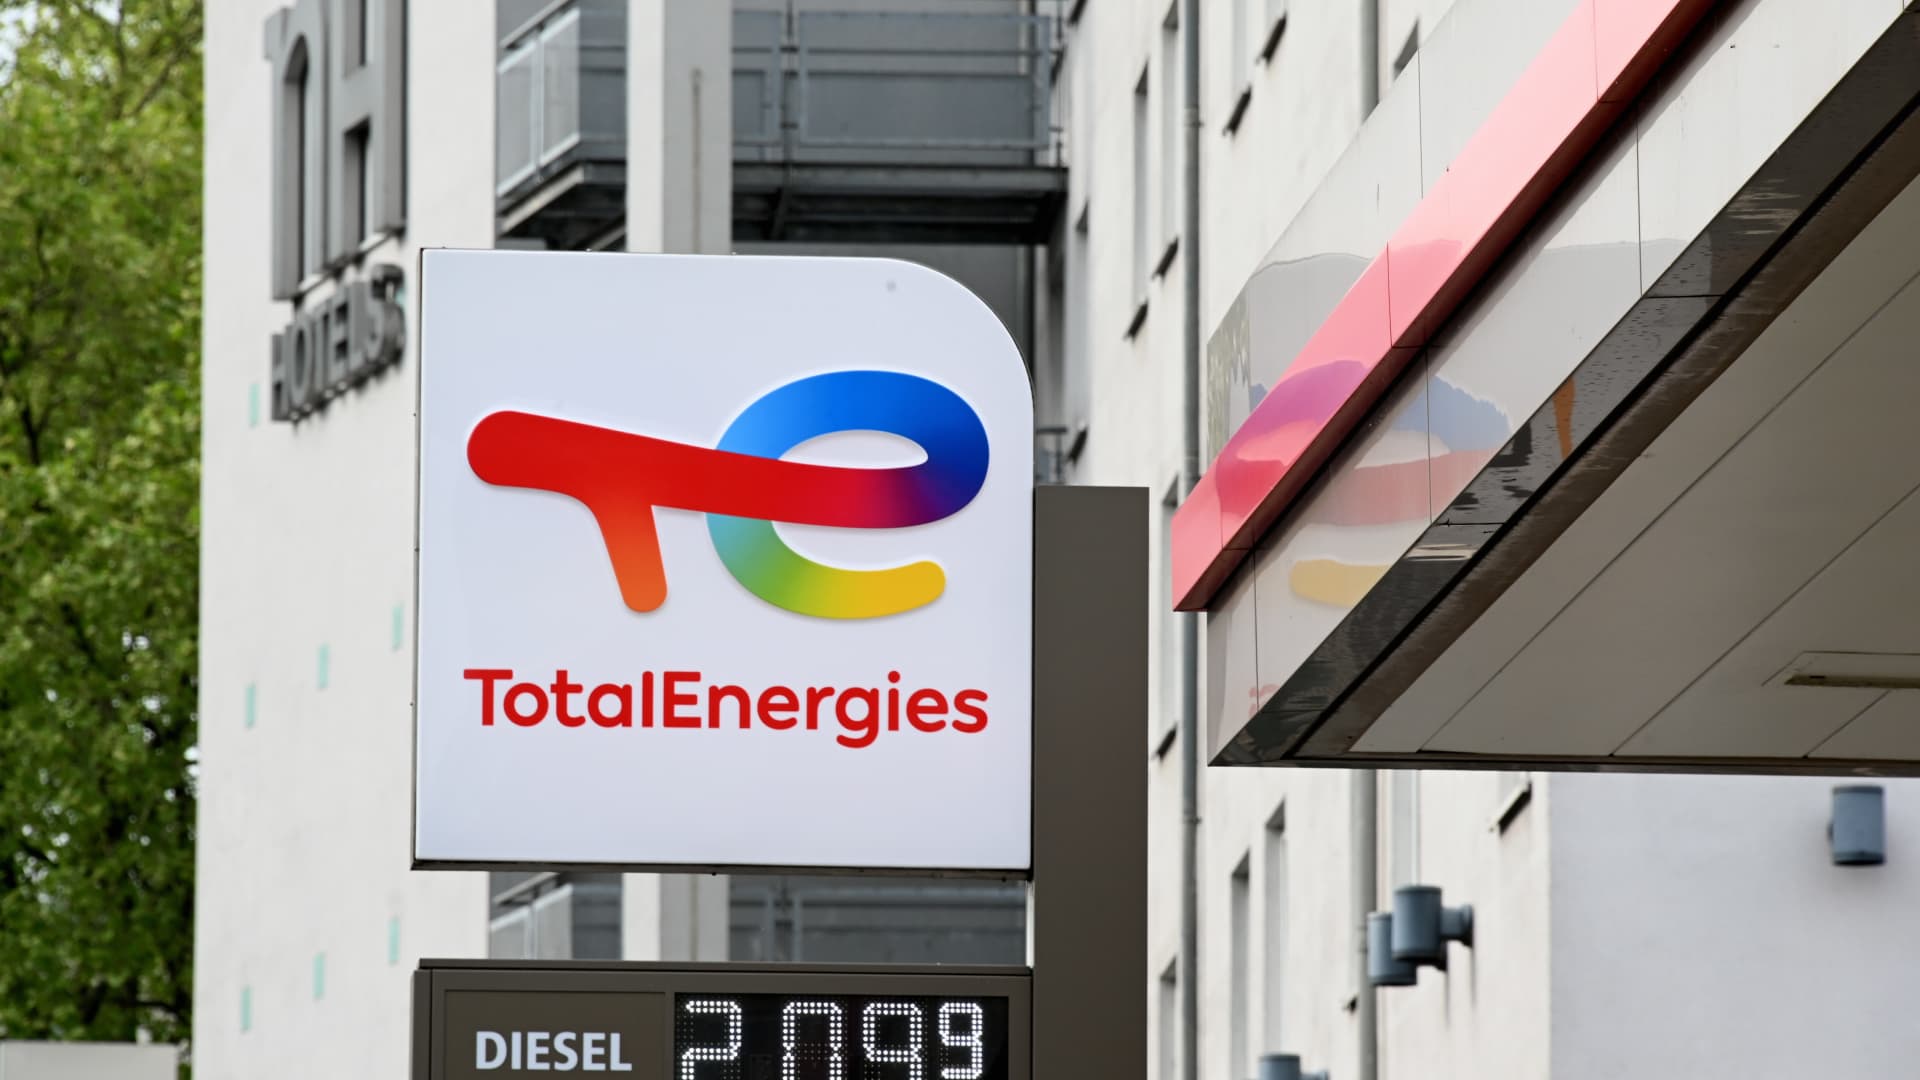 ‘Life is like it is’: TotalEnergies CEO defends strategy despite calls to cut fossil fuel production